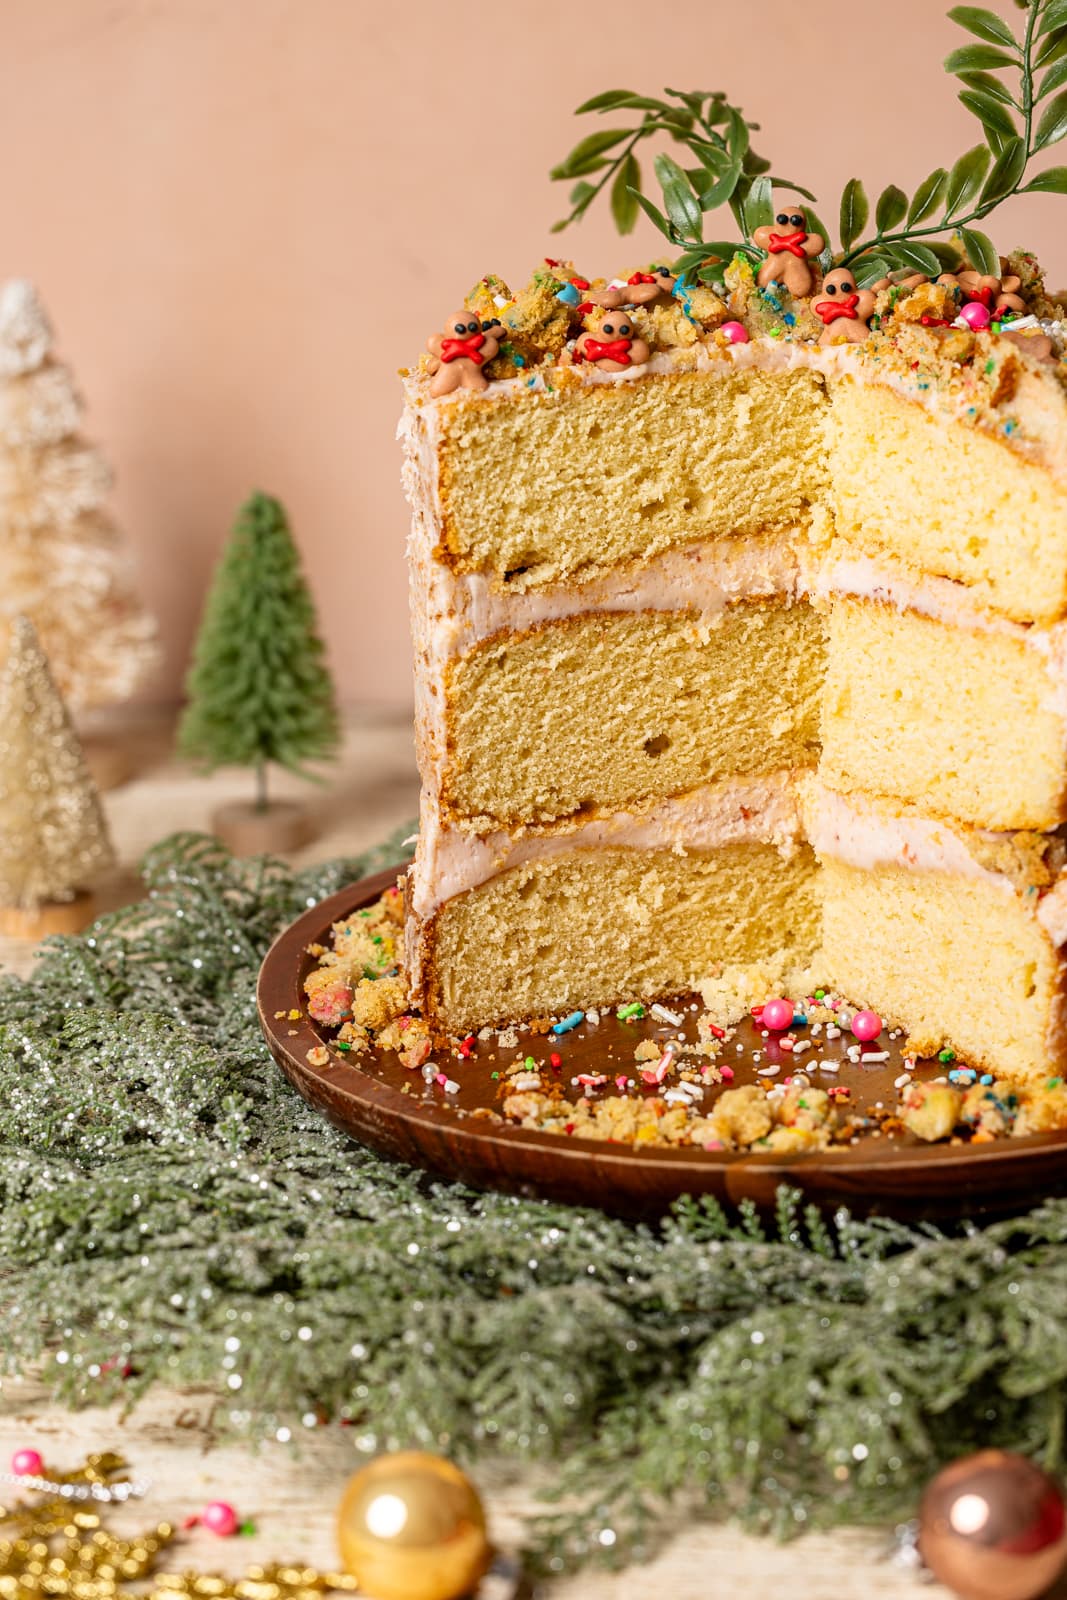 Layered cake with holiday wreath and ornaments.